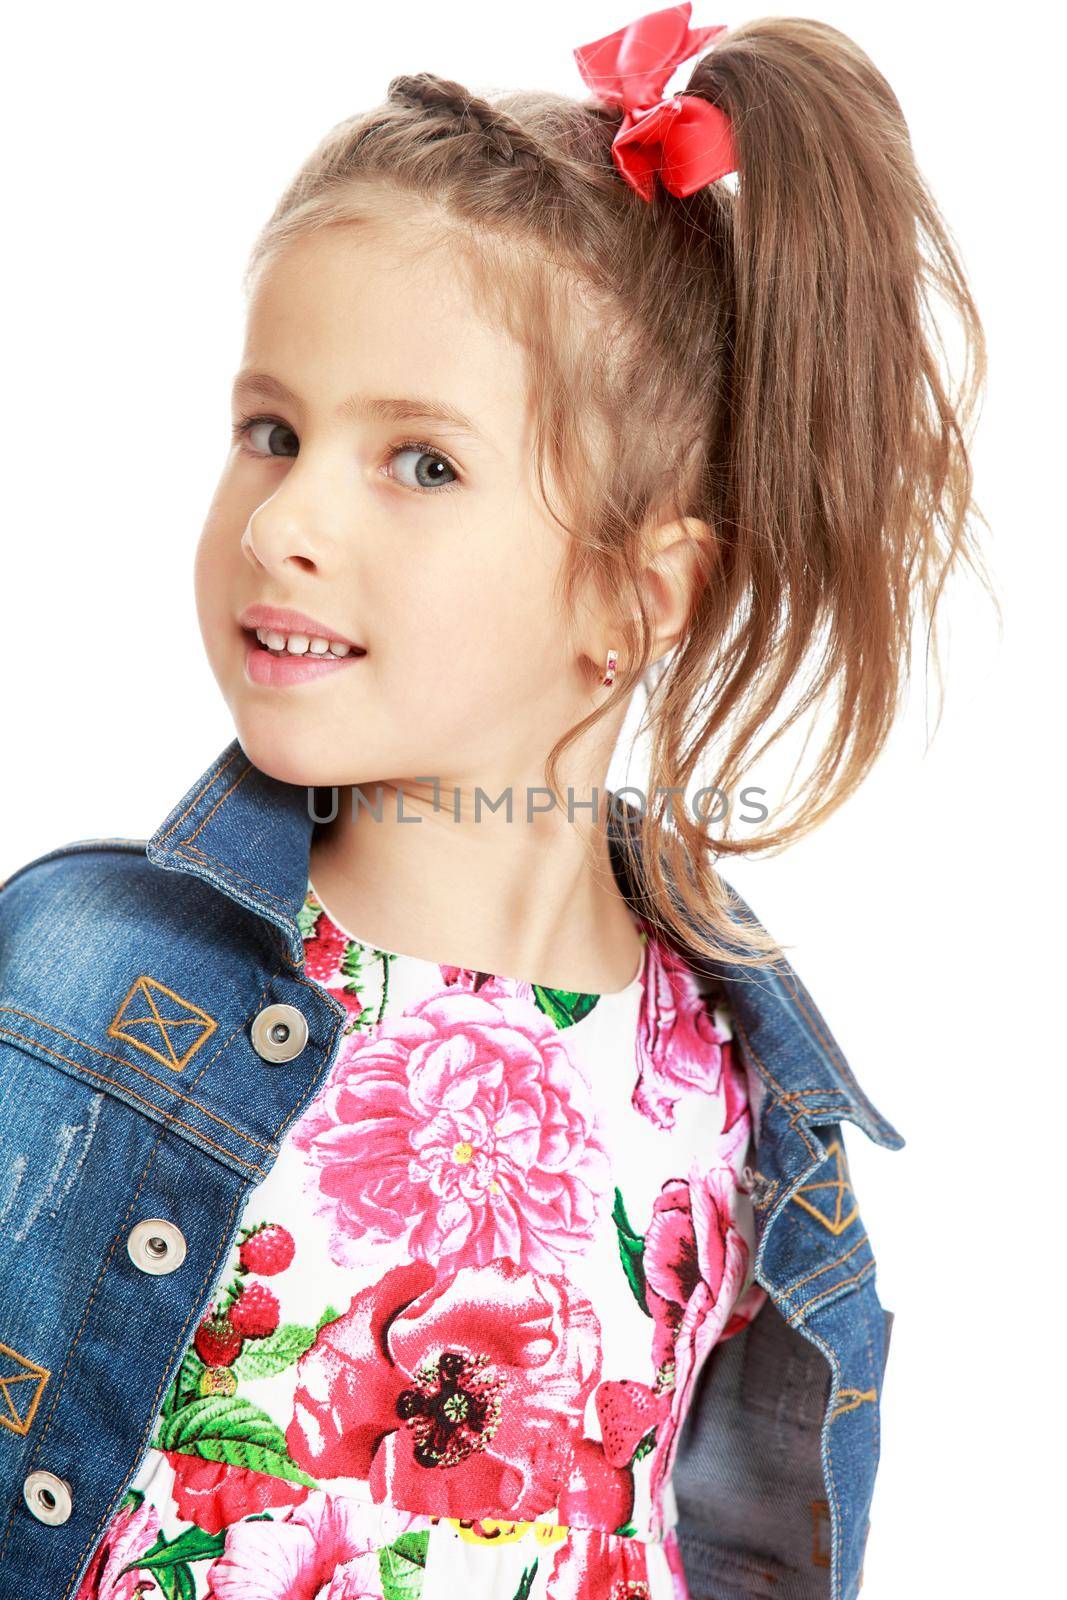 Cute little girl in dress ,denim jacket and red bow on her head . The girl is looking directly into the camera . close-up - Isolated on white background